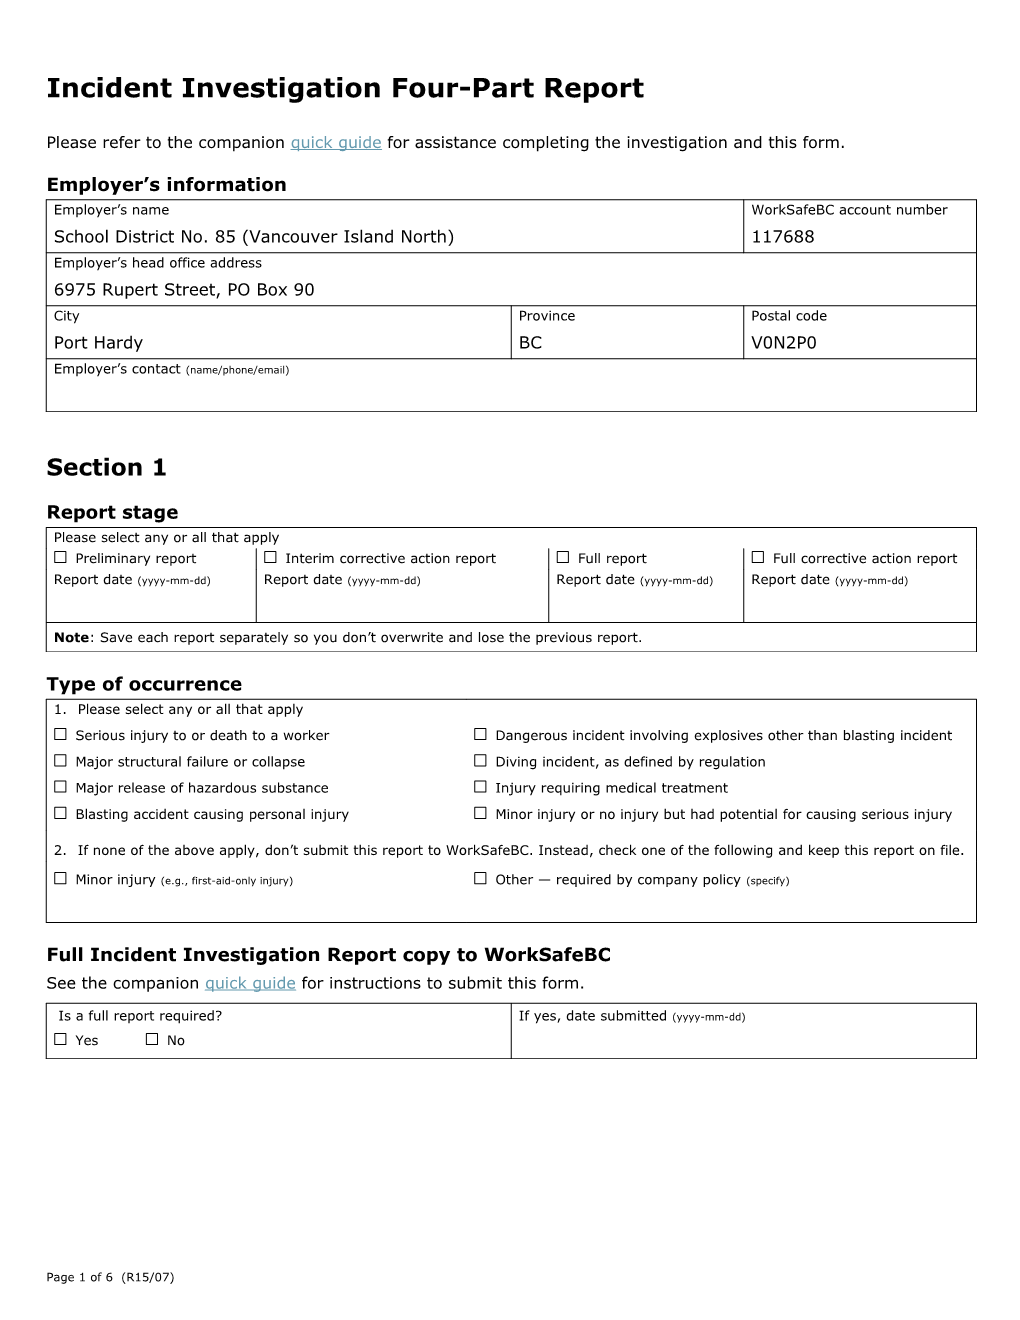 Full Incident Investigation Report Copy to Worksafebc